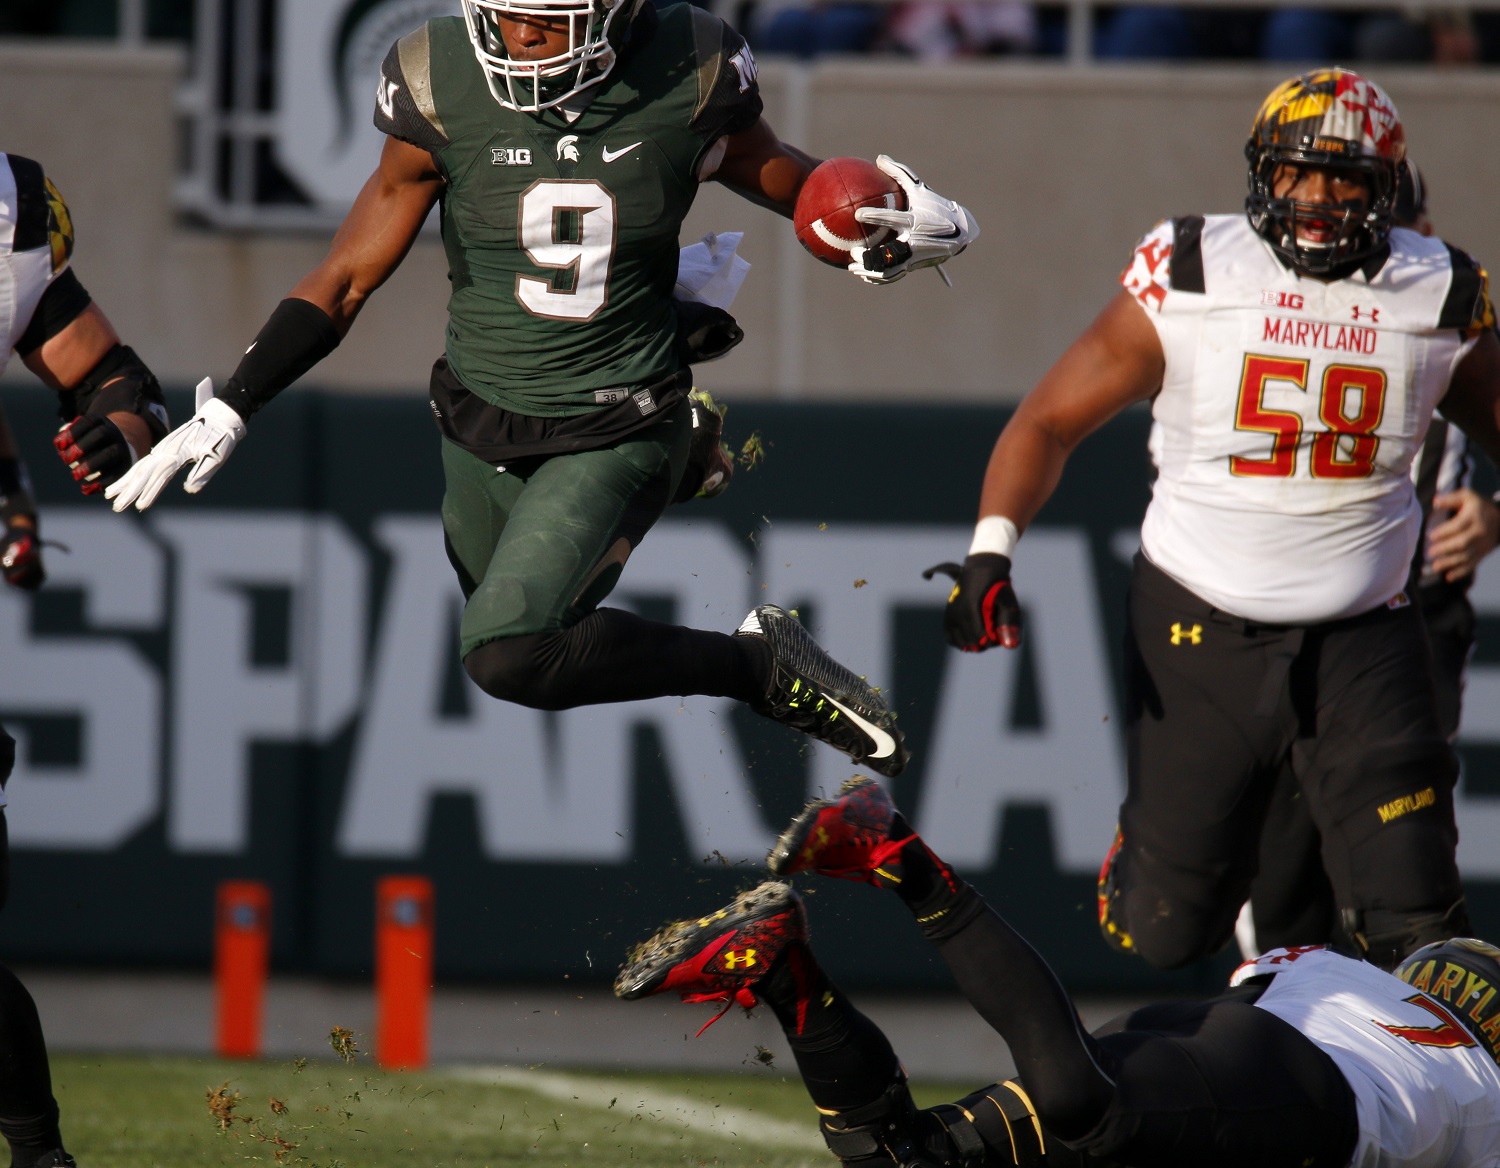 Michigan State safety Montae Nicholson (9) leaps over Maryland quarterback Caleb Rowe, bottom right, while returning an interception as Maryland's Damian Prince (58) pursues during the fourth quarter of an NCAA college football game, Saturday, Nov. 14, 2015, in East Lansing, Mich. (AP Photo/Al Goldis)